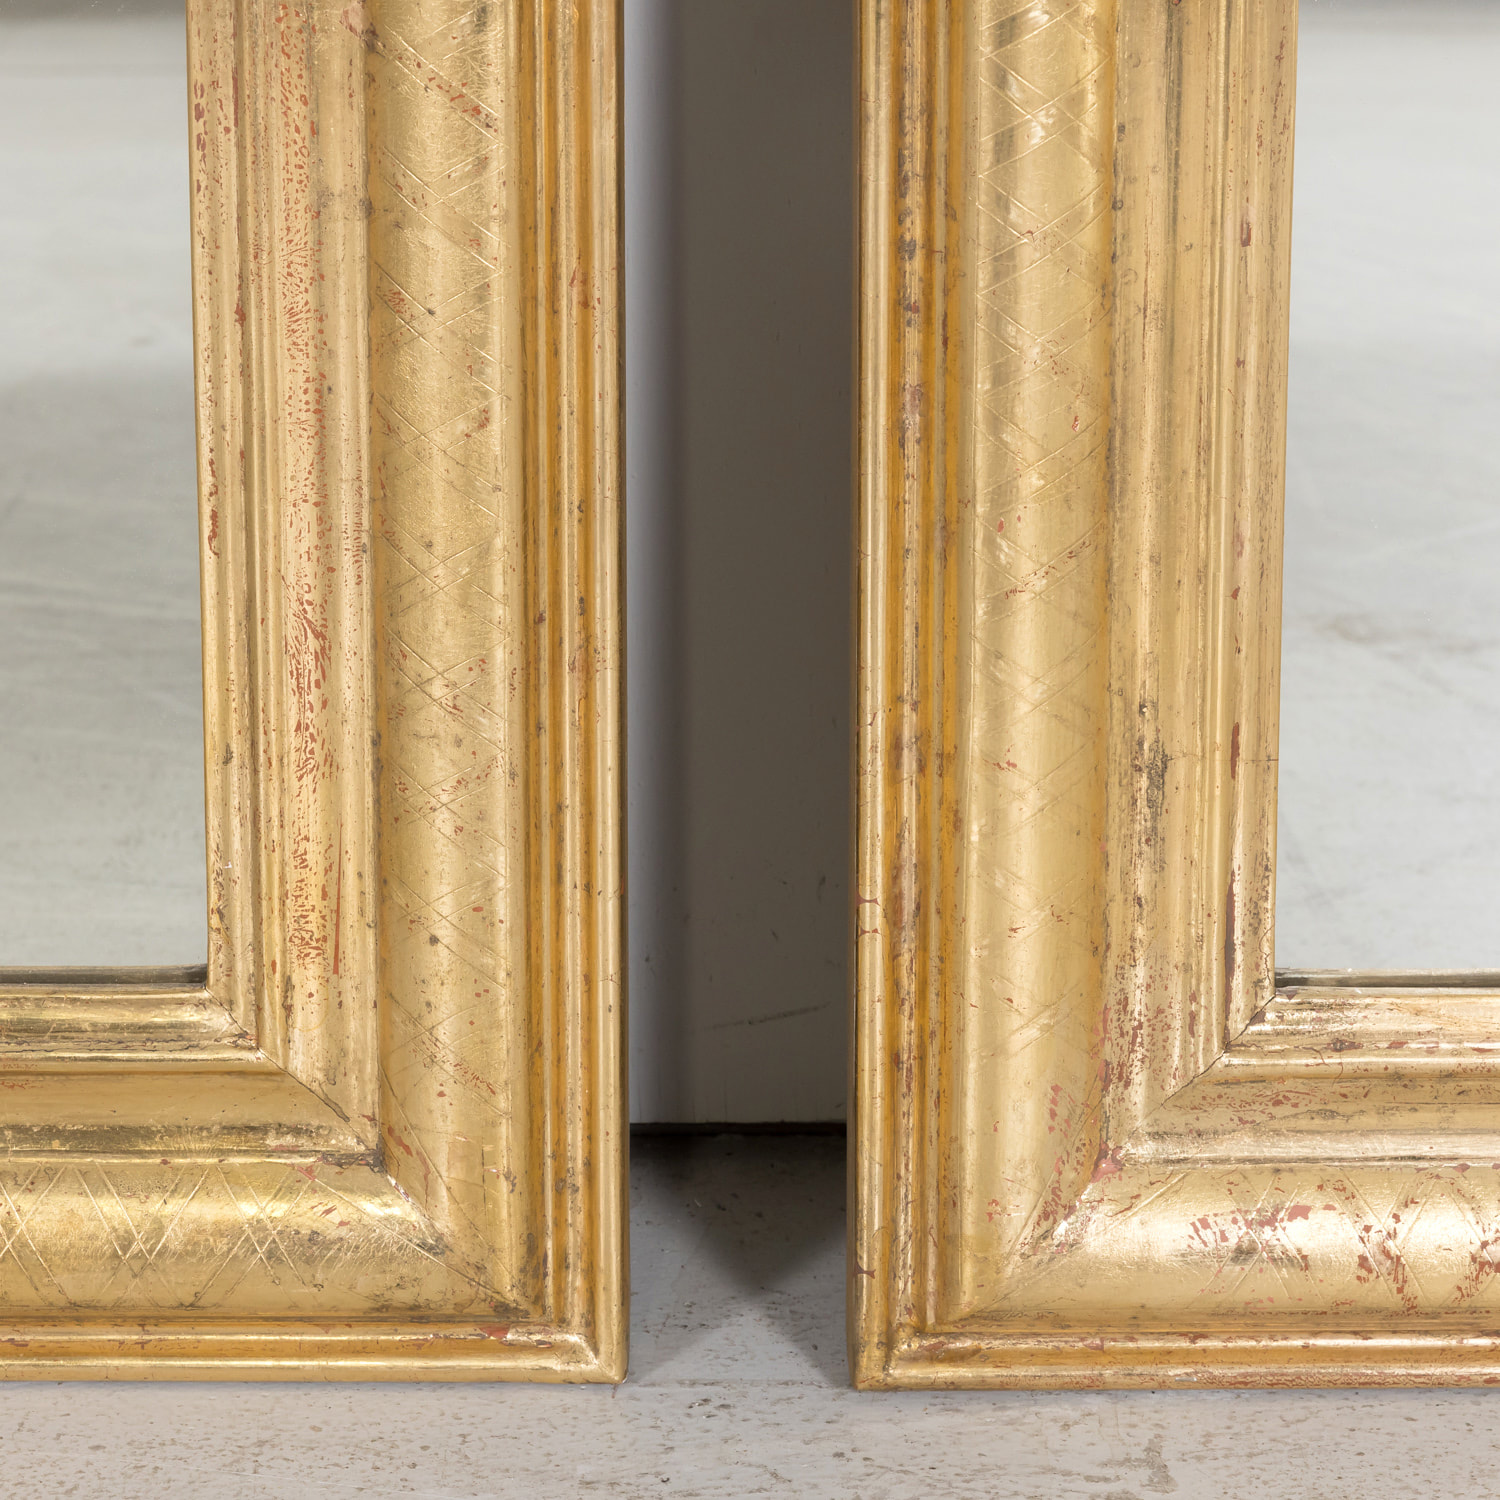 French 19th Century Large Louis Philippe Gold Gilt Mirror at 1stDibs